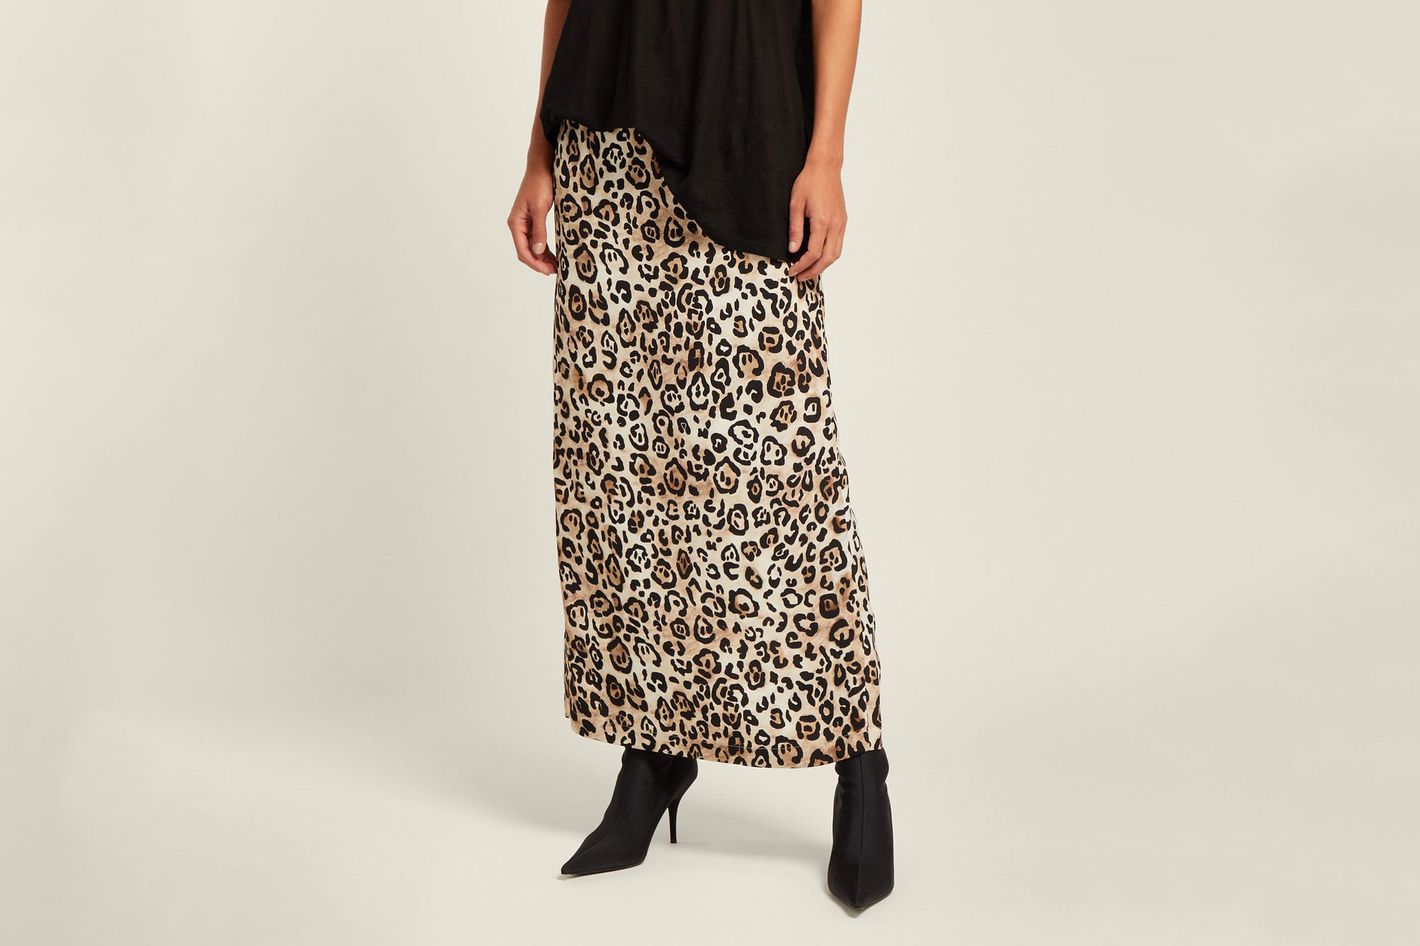 Leopard skirts are fall's biggest trend: Shop 12 versions now